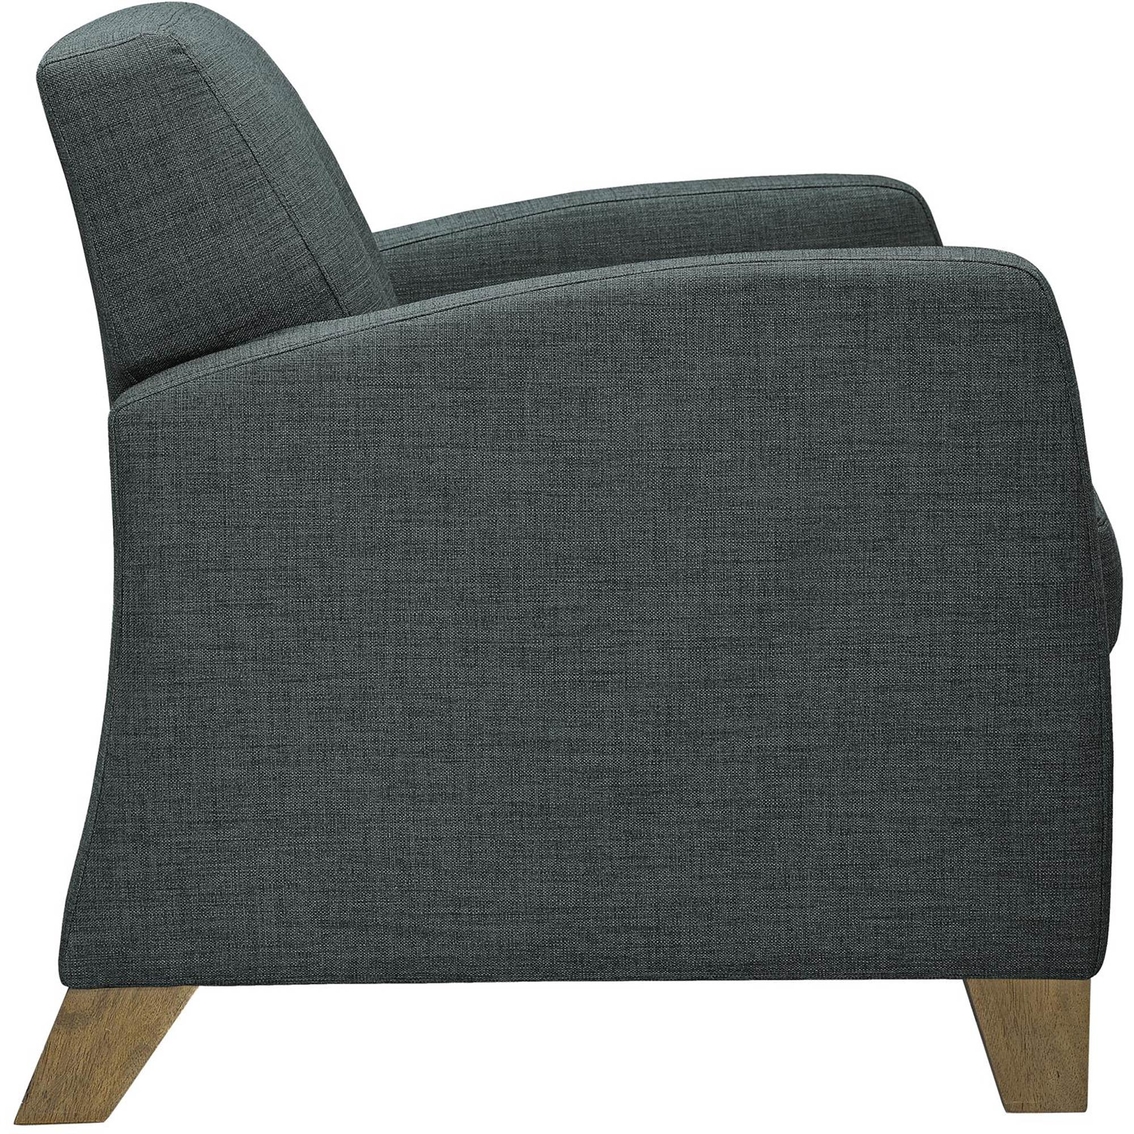 Dorel Living Leela Accent Chair - Image 2 of 4